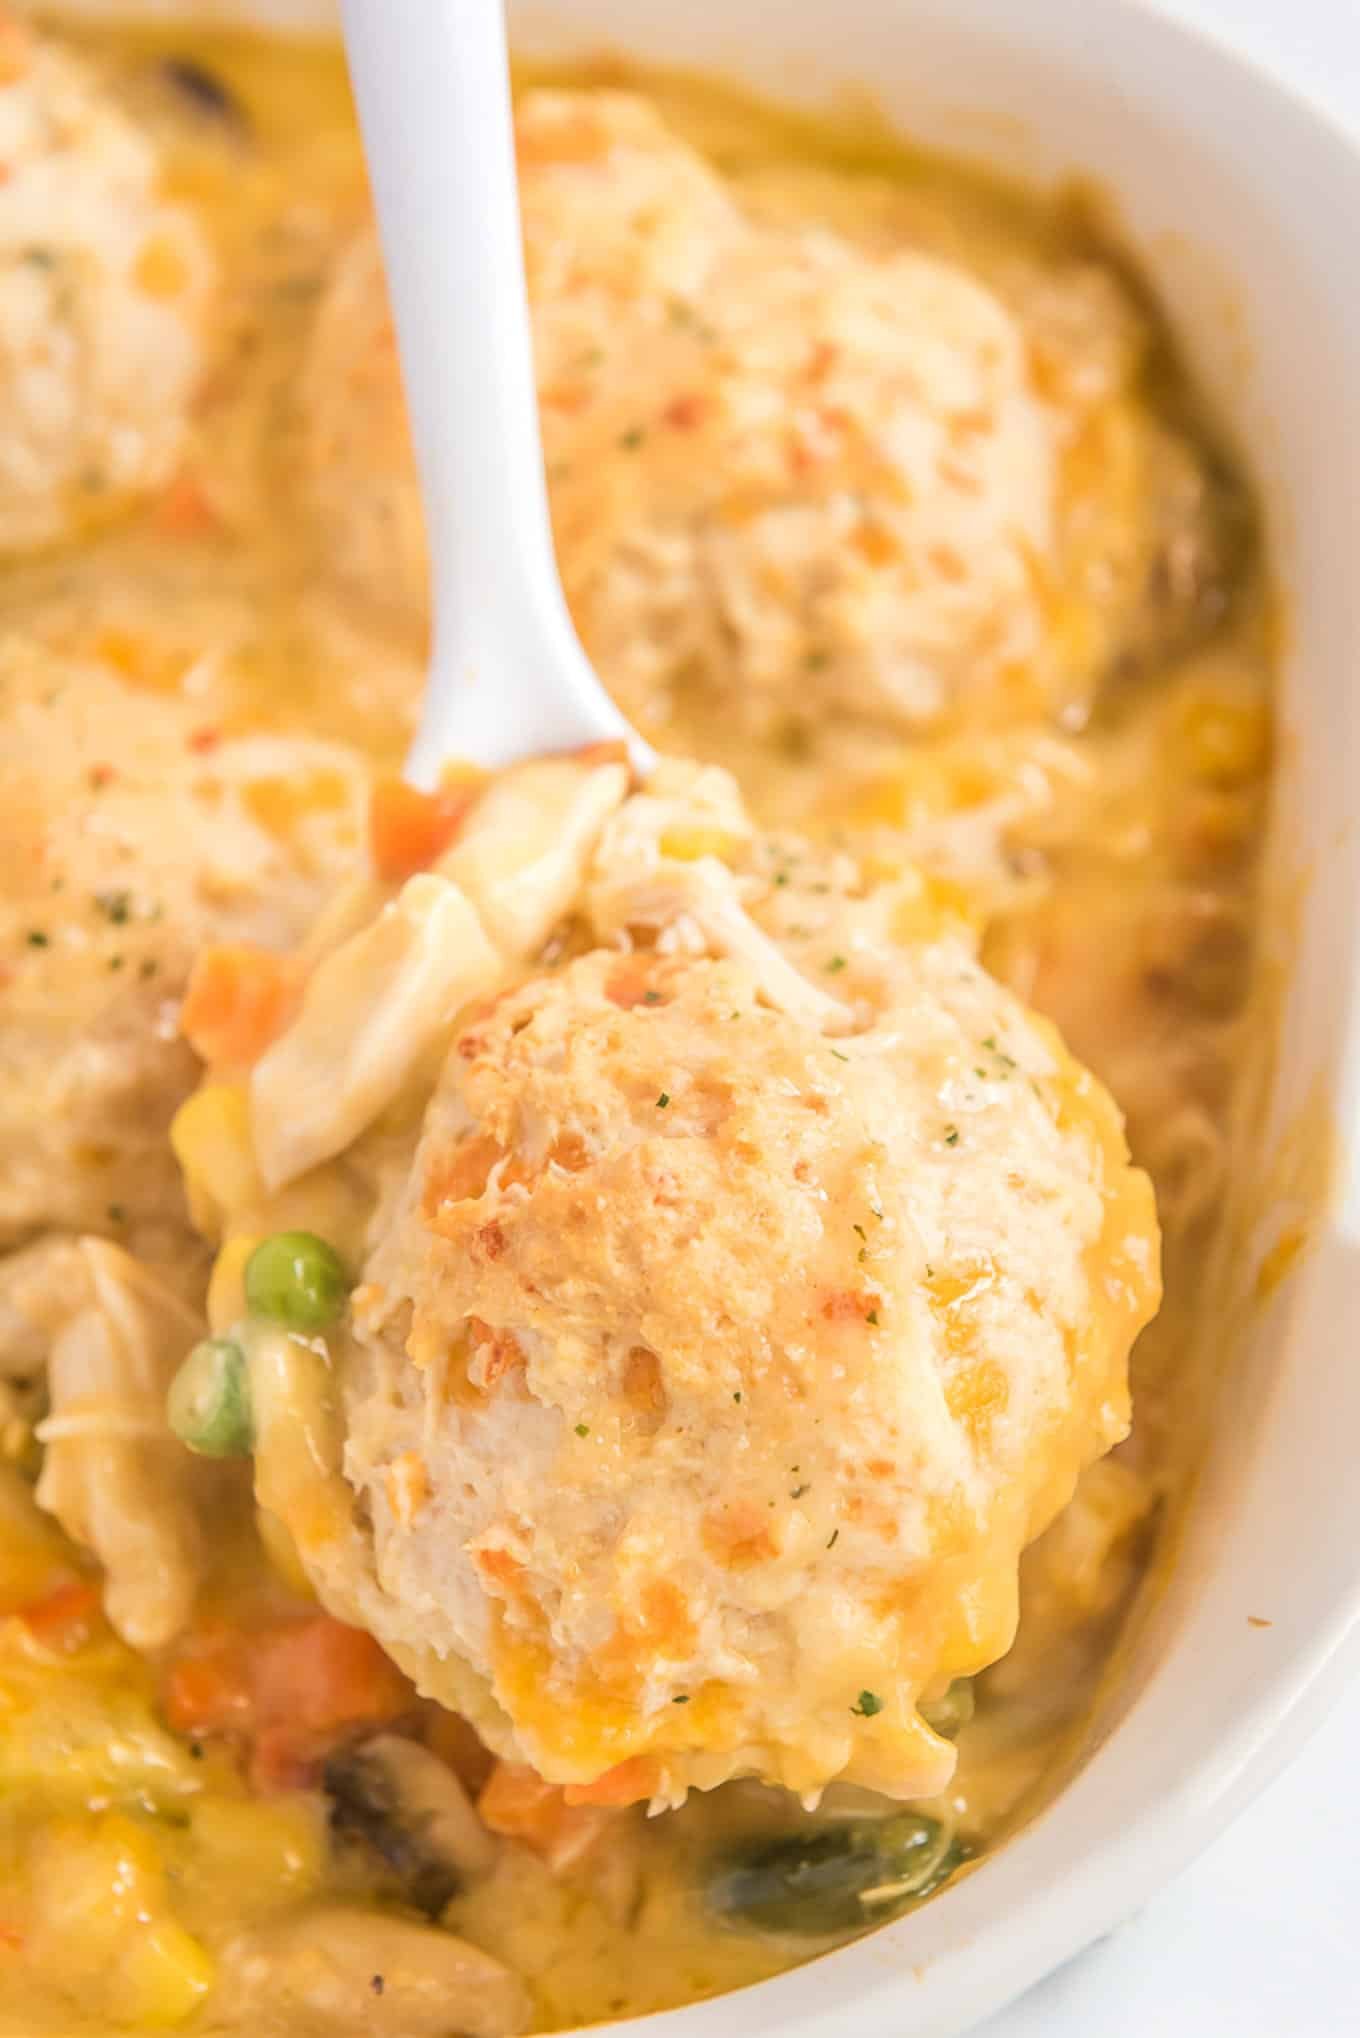 Scooping out chicken pot pie with a spoon.